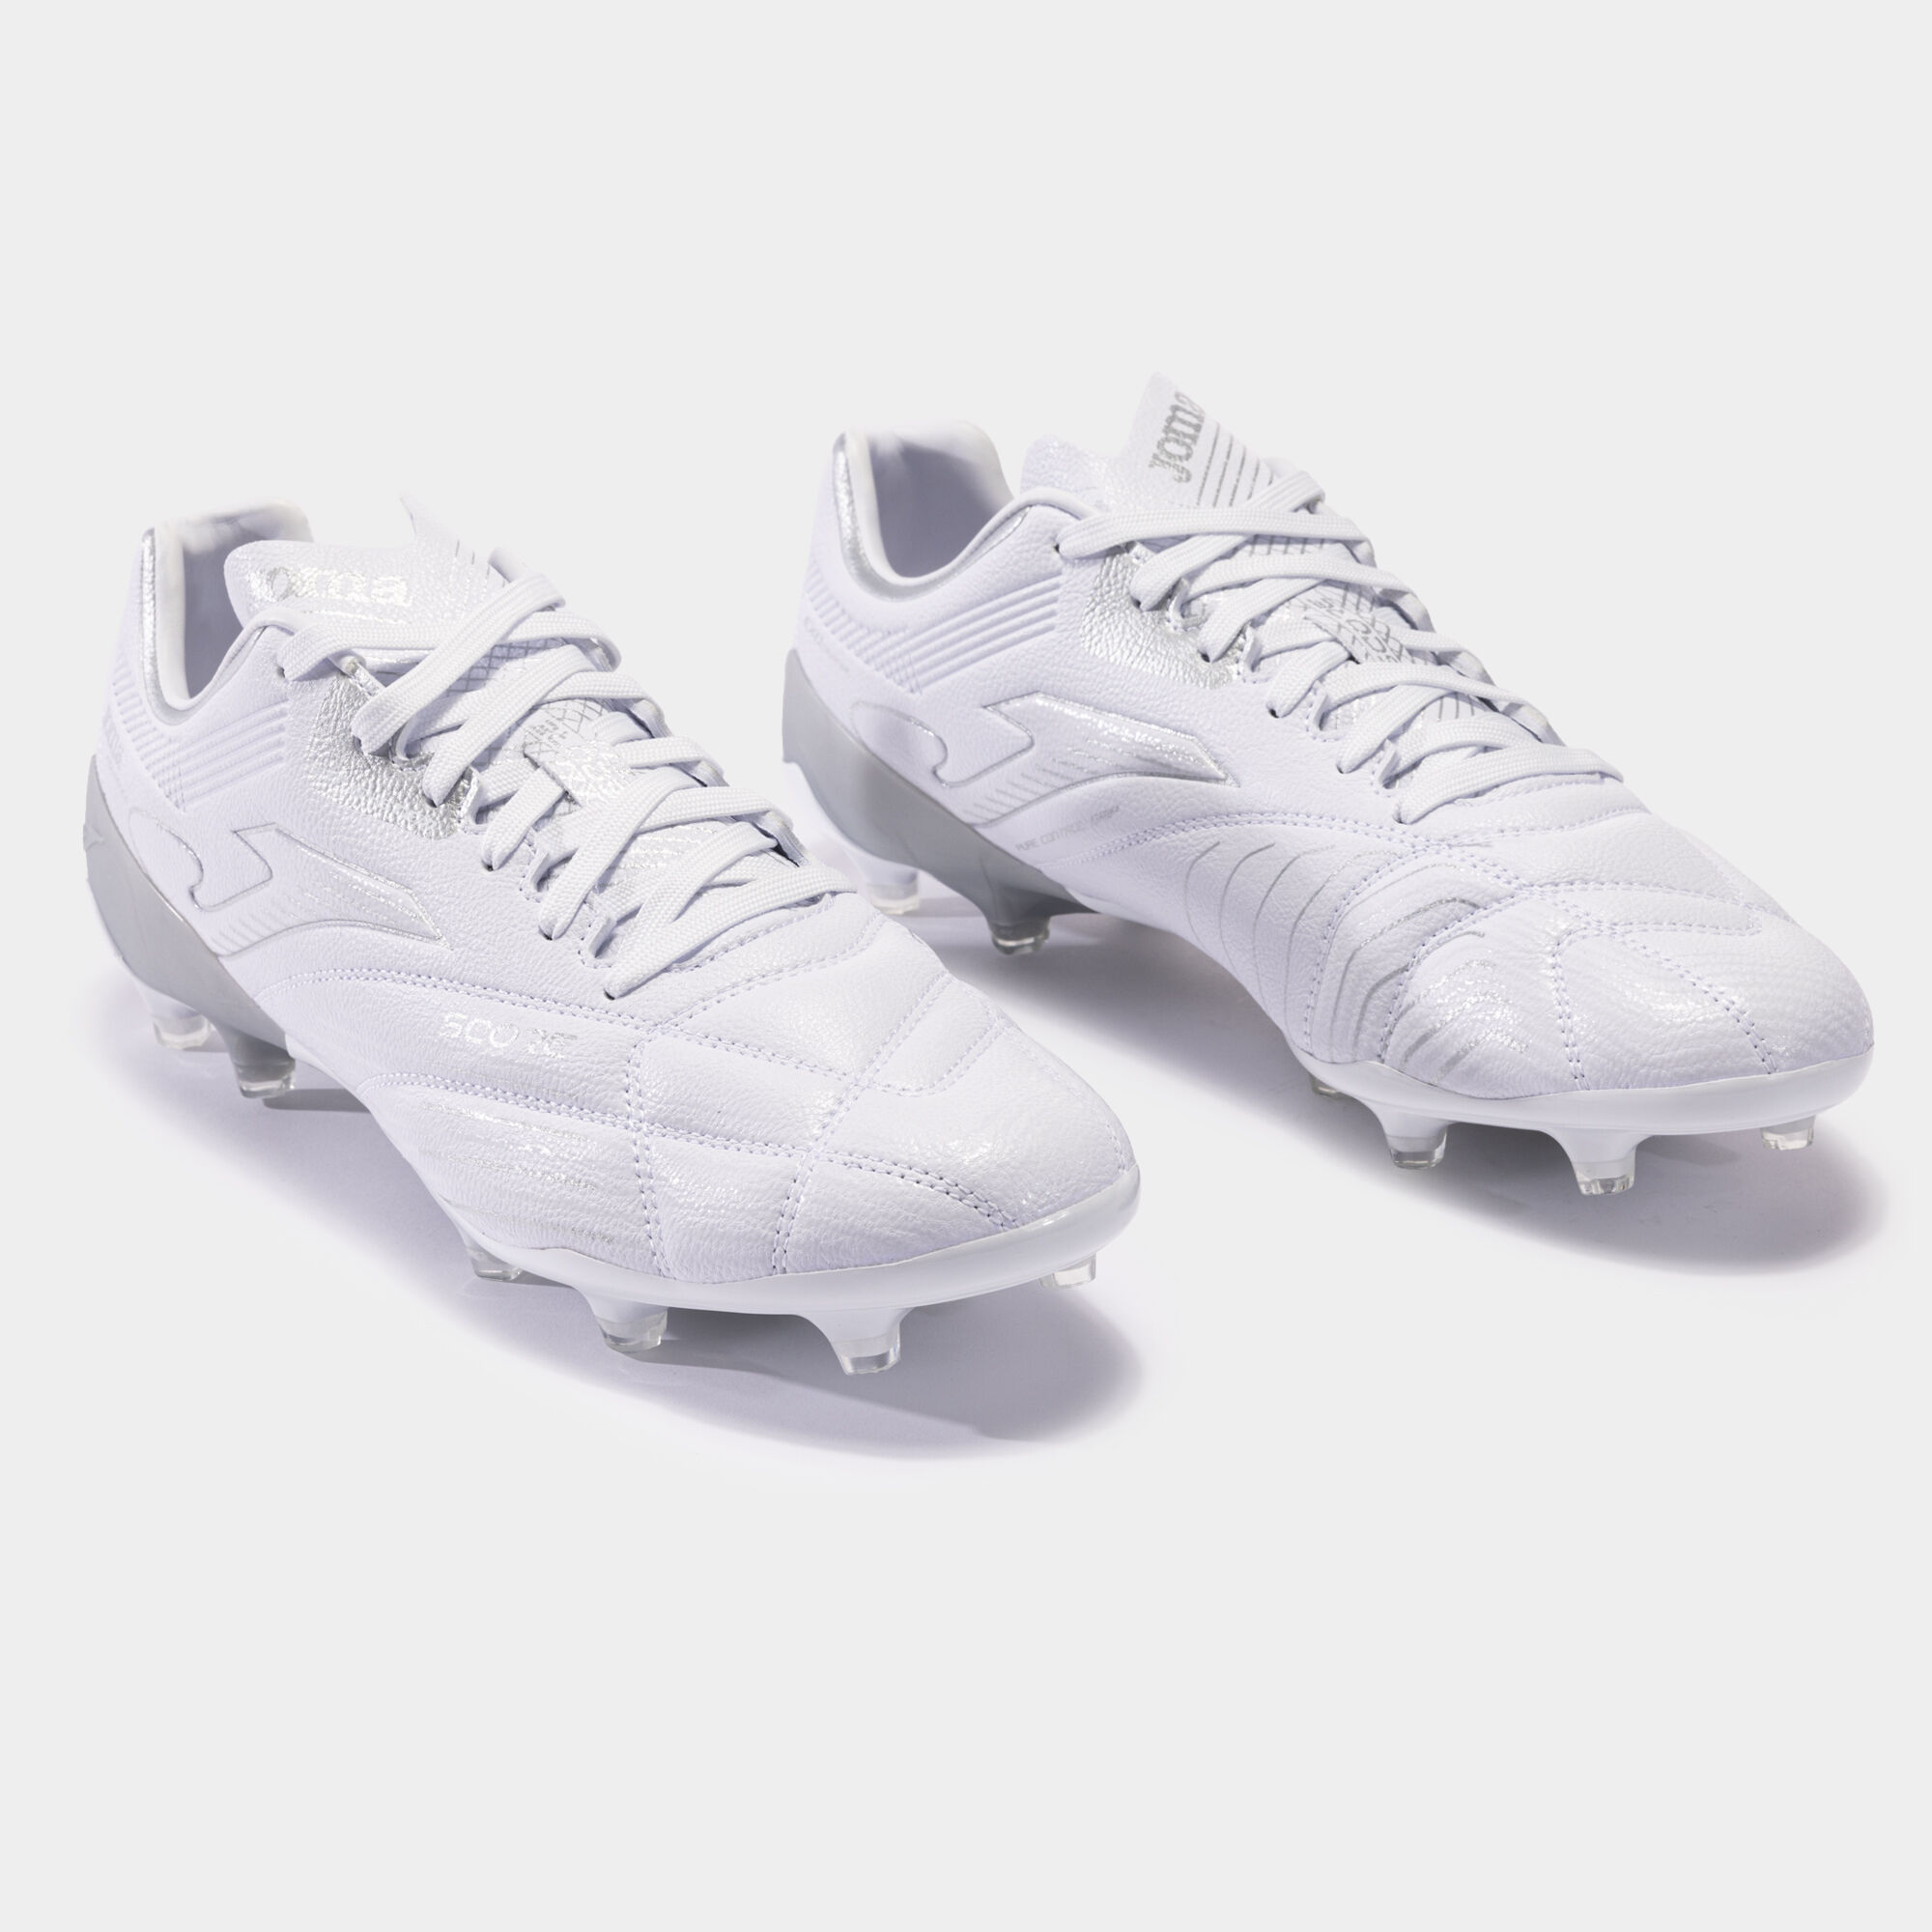 Chaussures football Score 23 gazon synthétique AG blanc